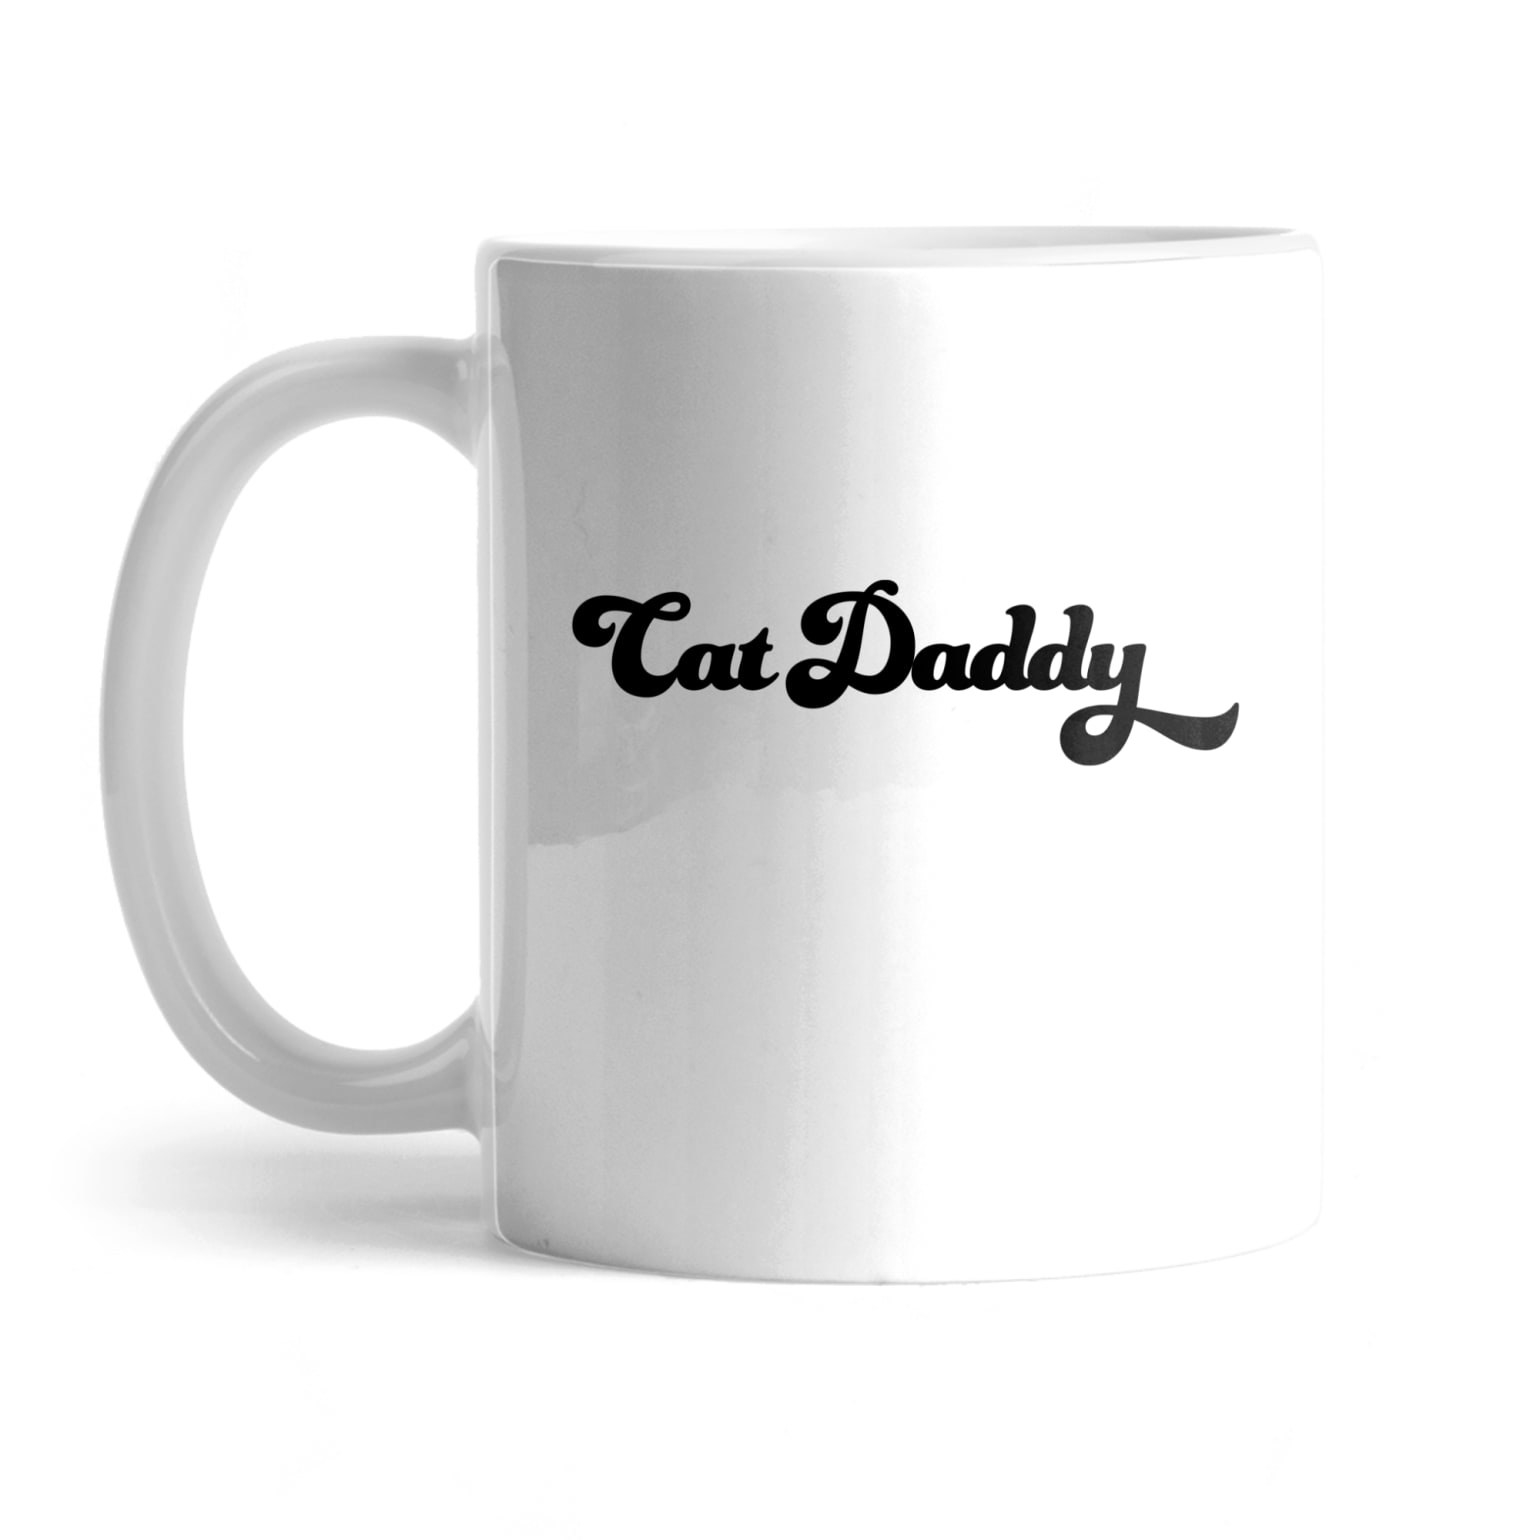 The mug with &quot;Cat Daddy&quot; graphic